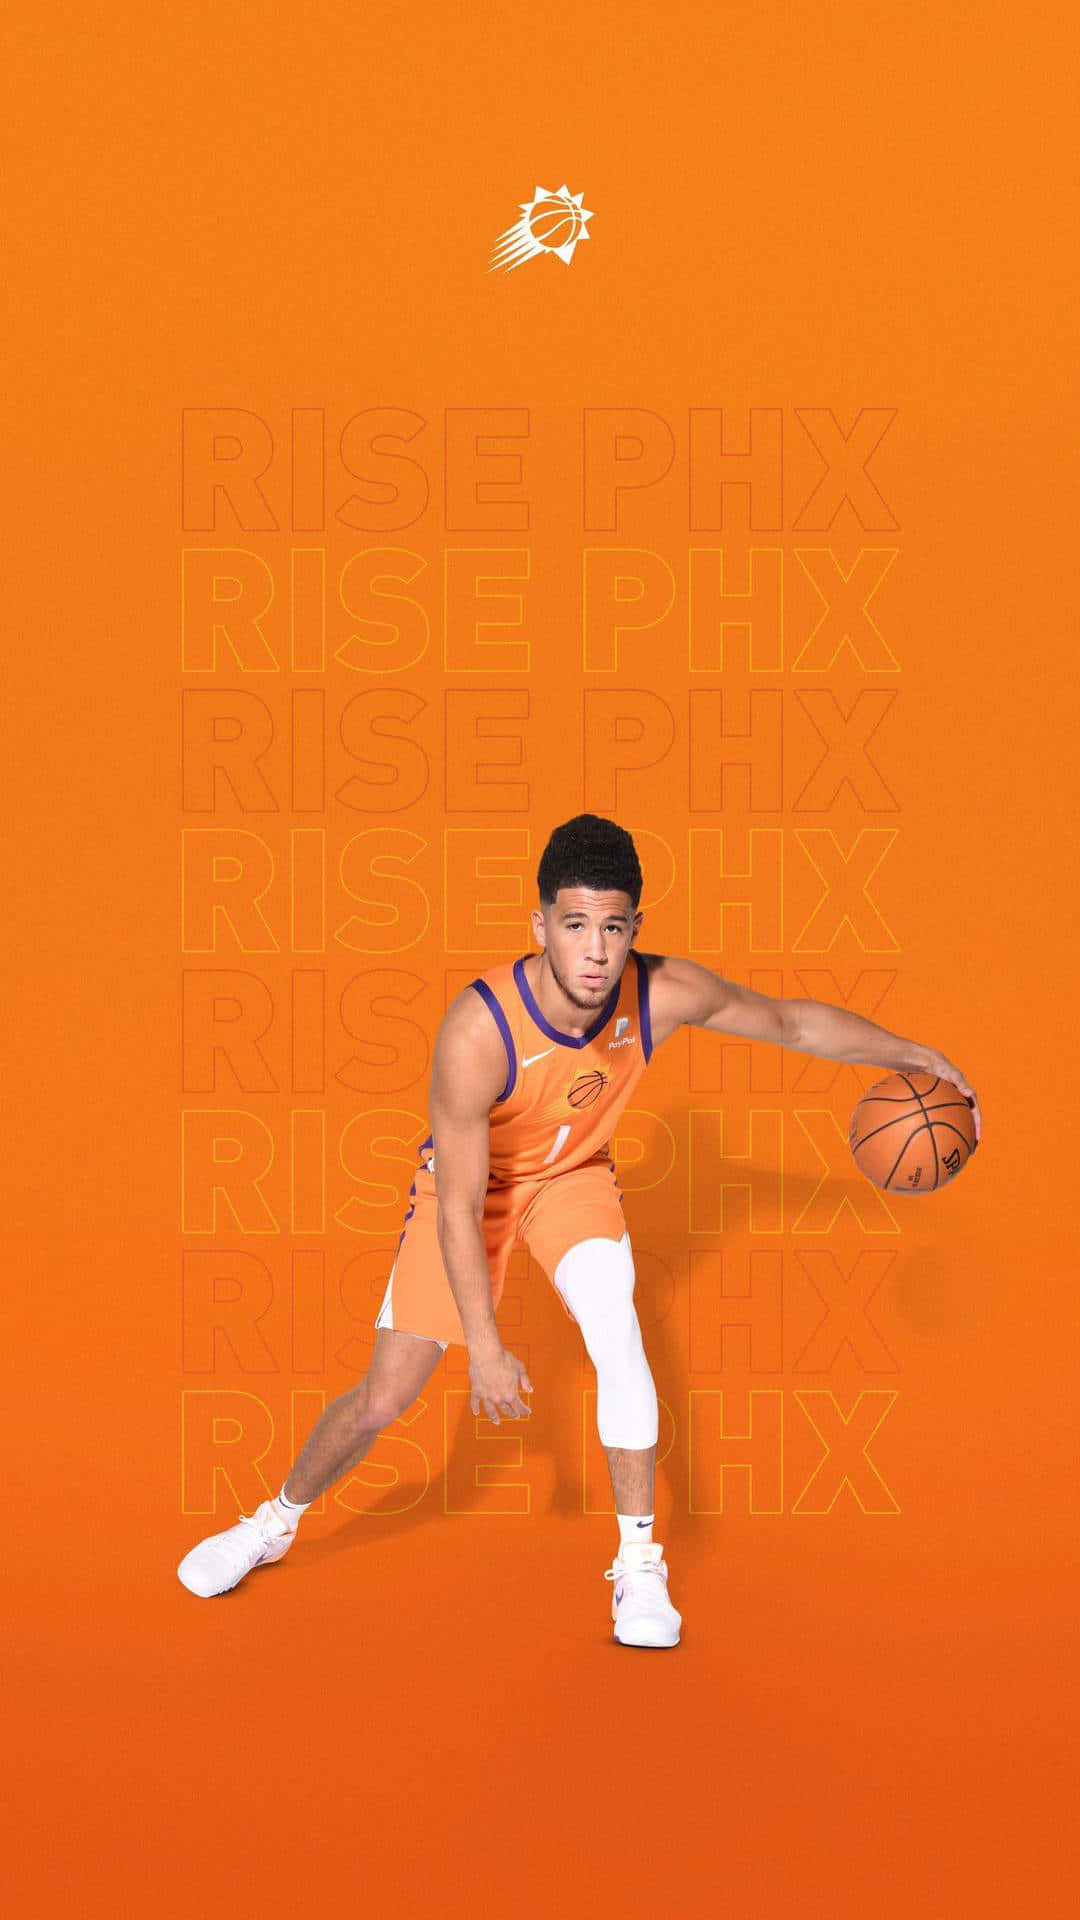 a man in orange and white is holding a basketball Wallpaper